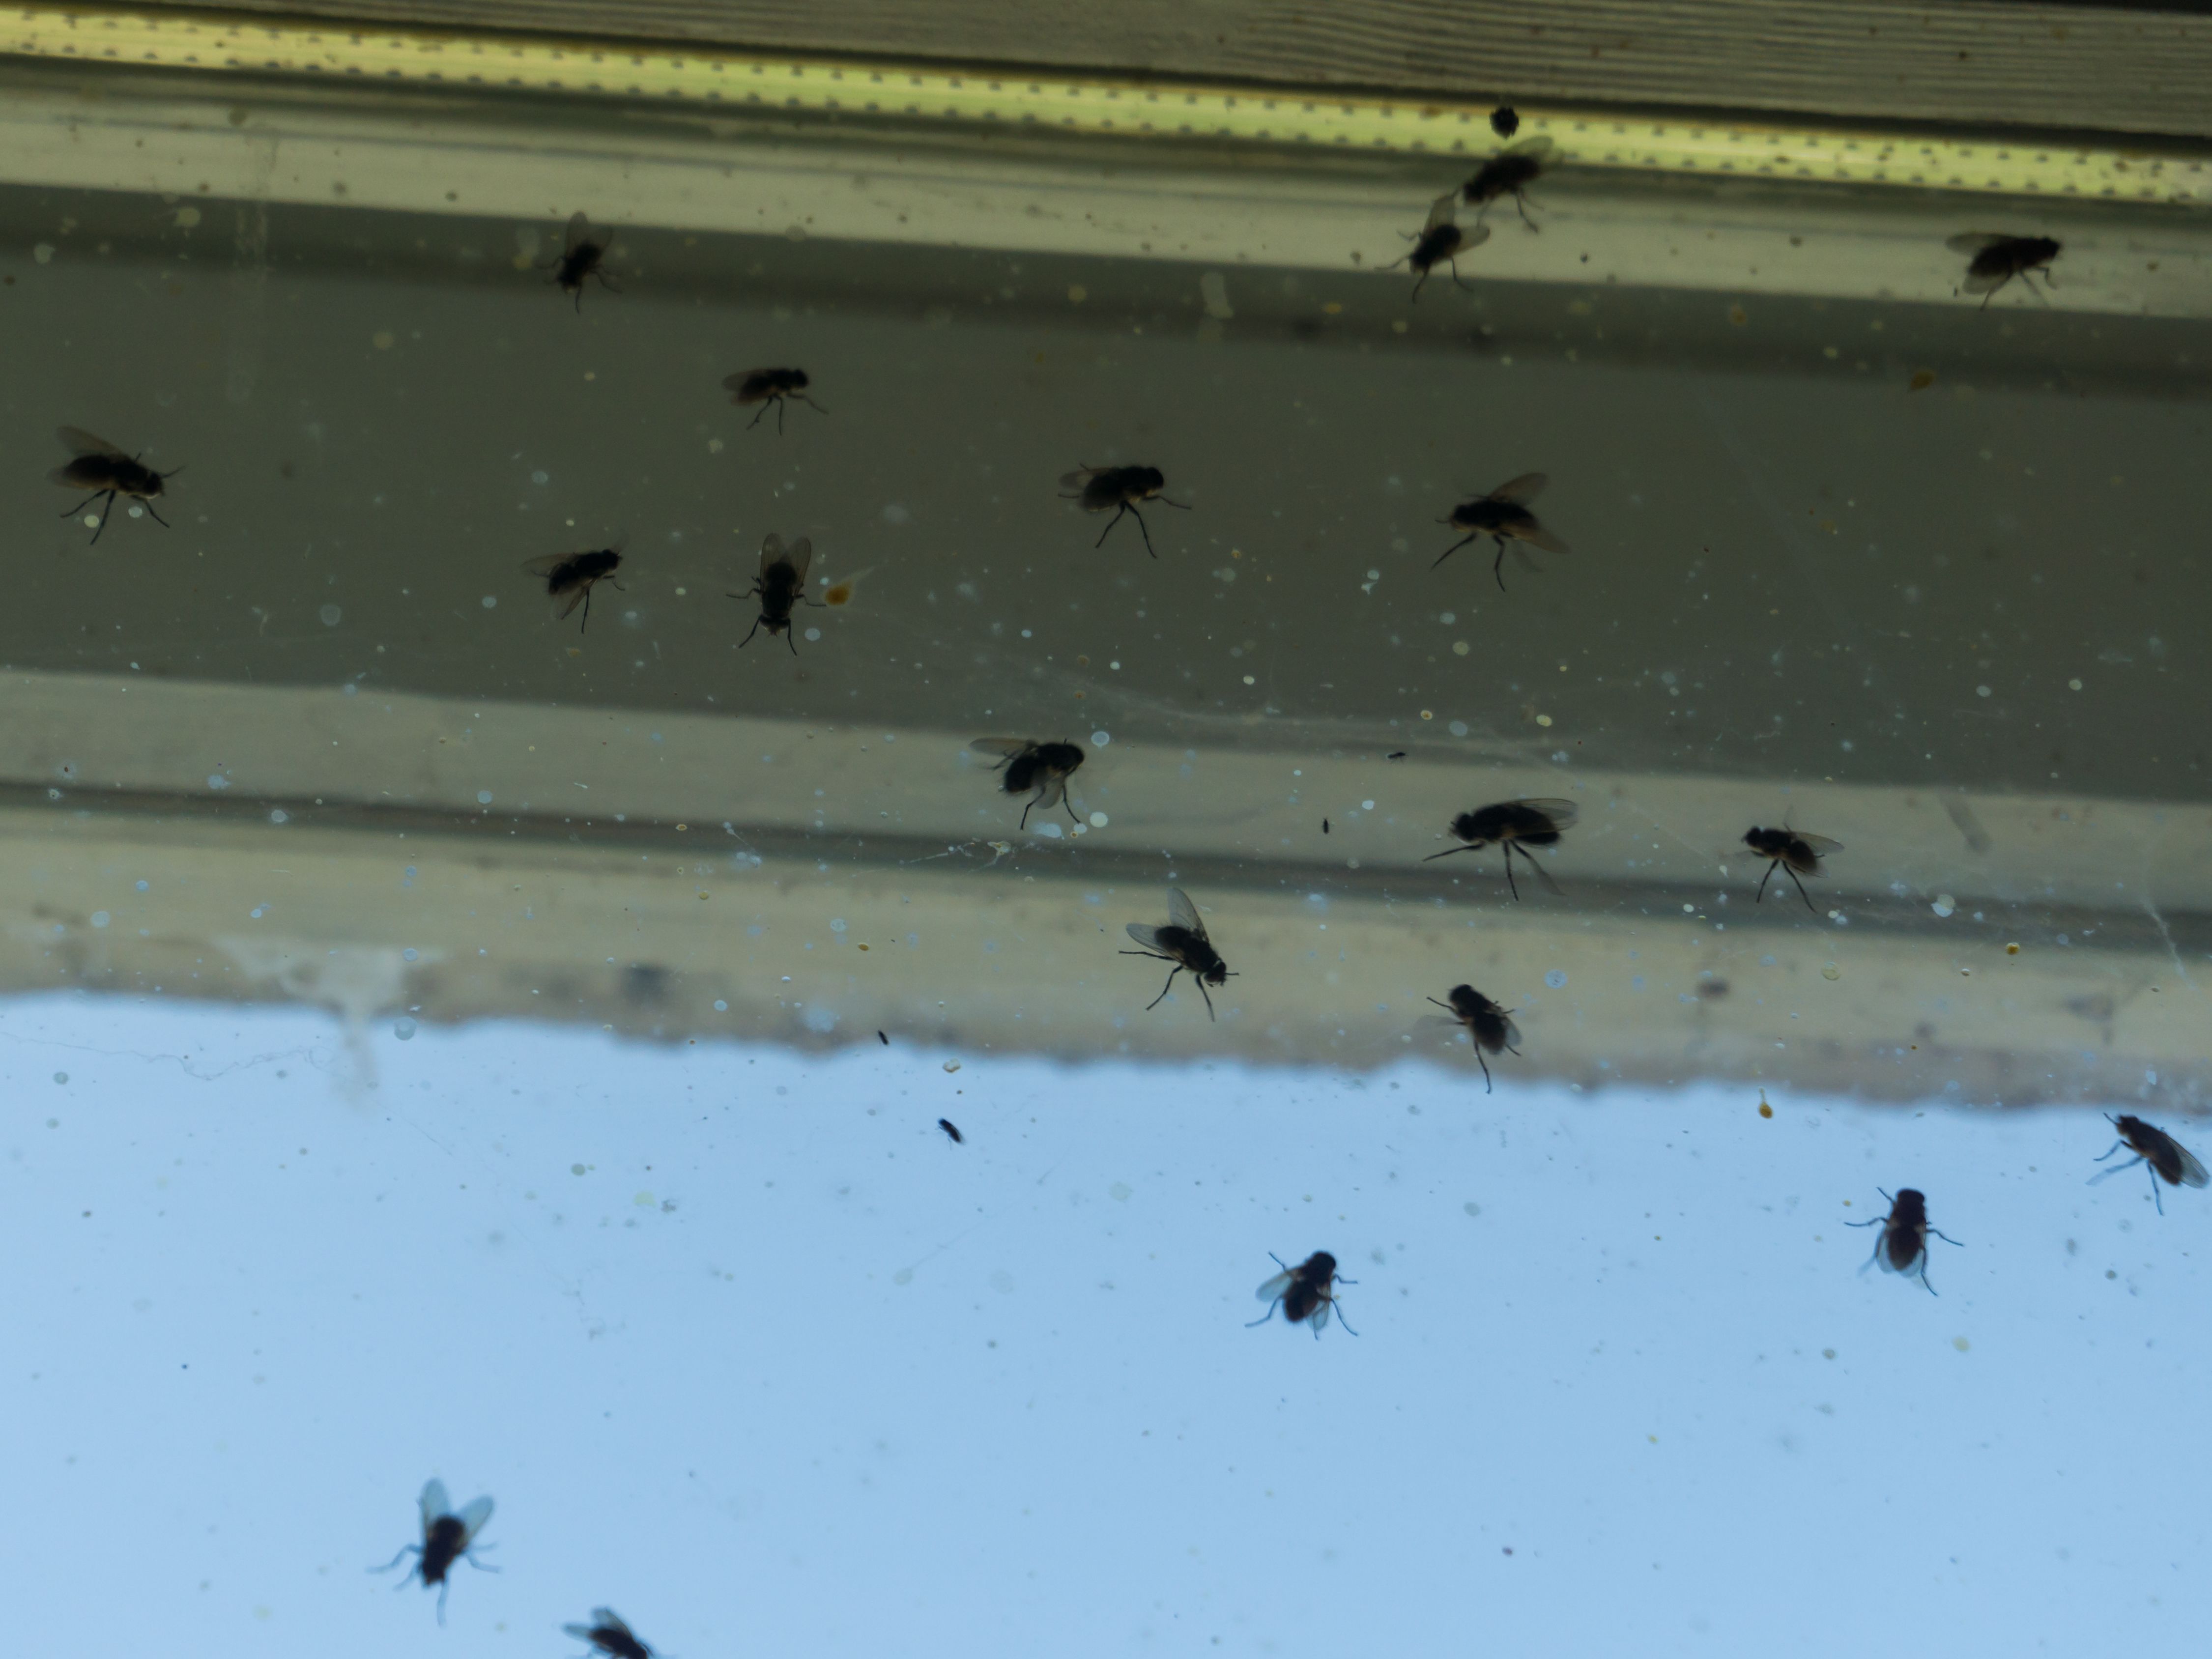 House flies: How to get rid of them 'really fast' - use apple cider vinegar